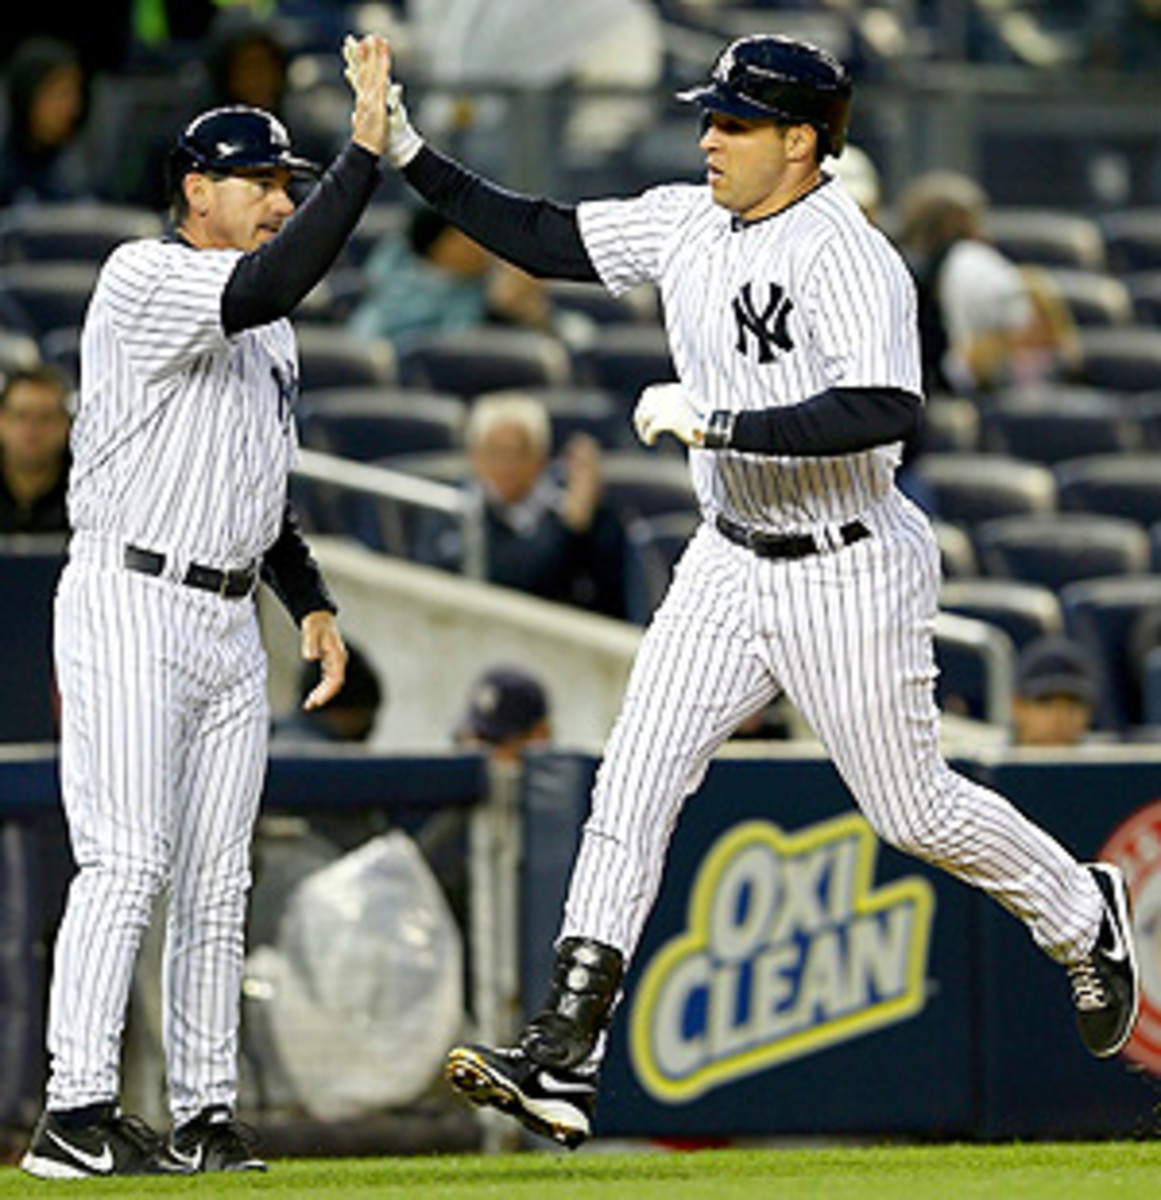 Mark Teixeira gets a high-five after hitting a solo home run vs. the Mariners.